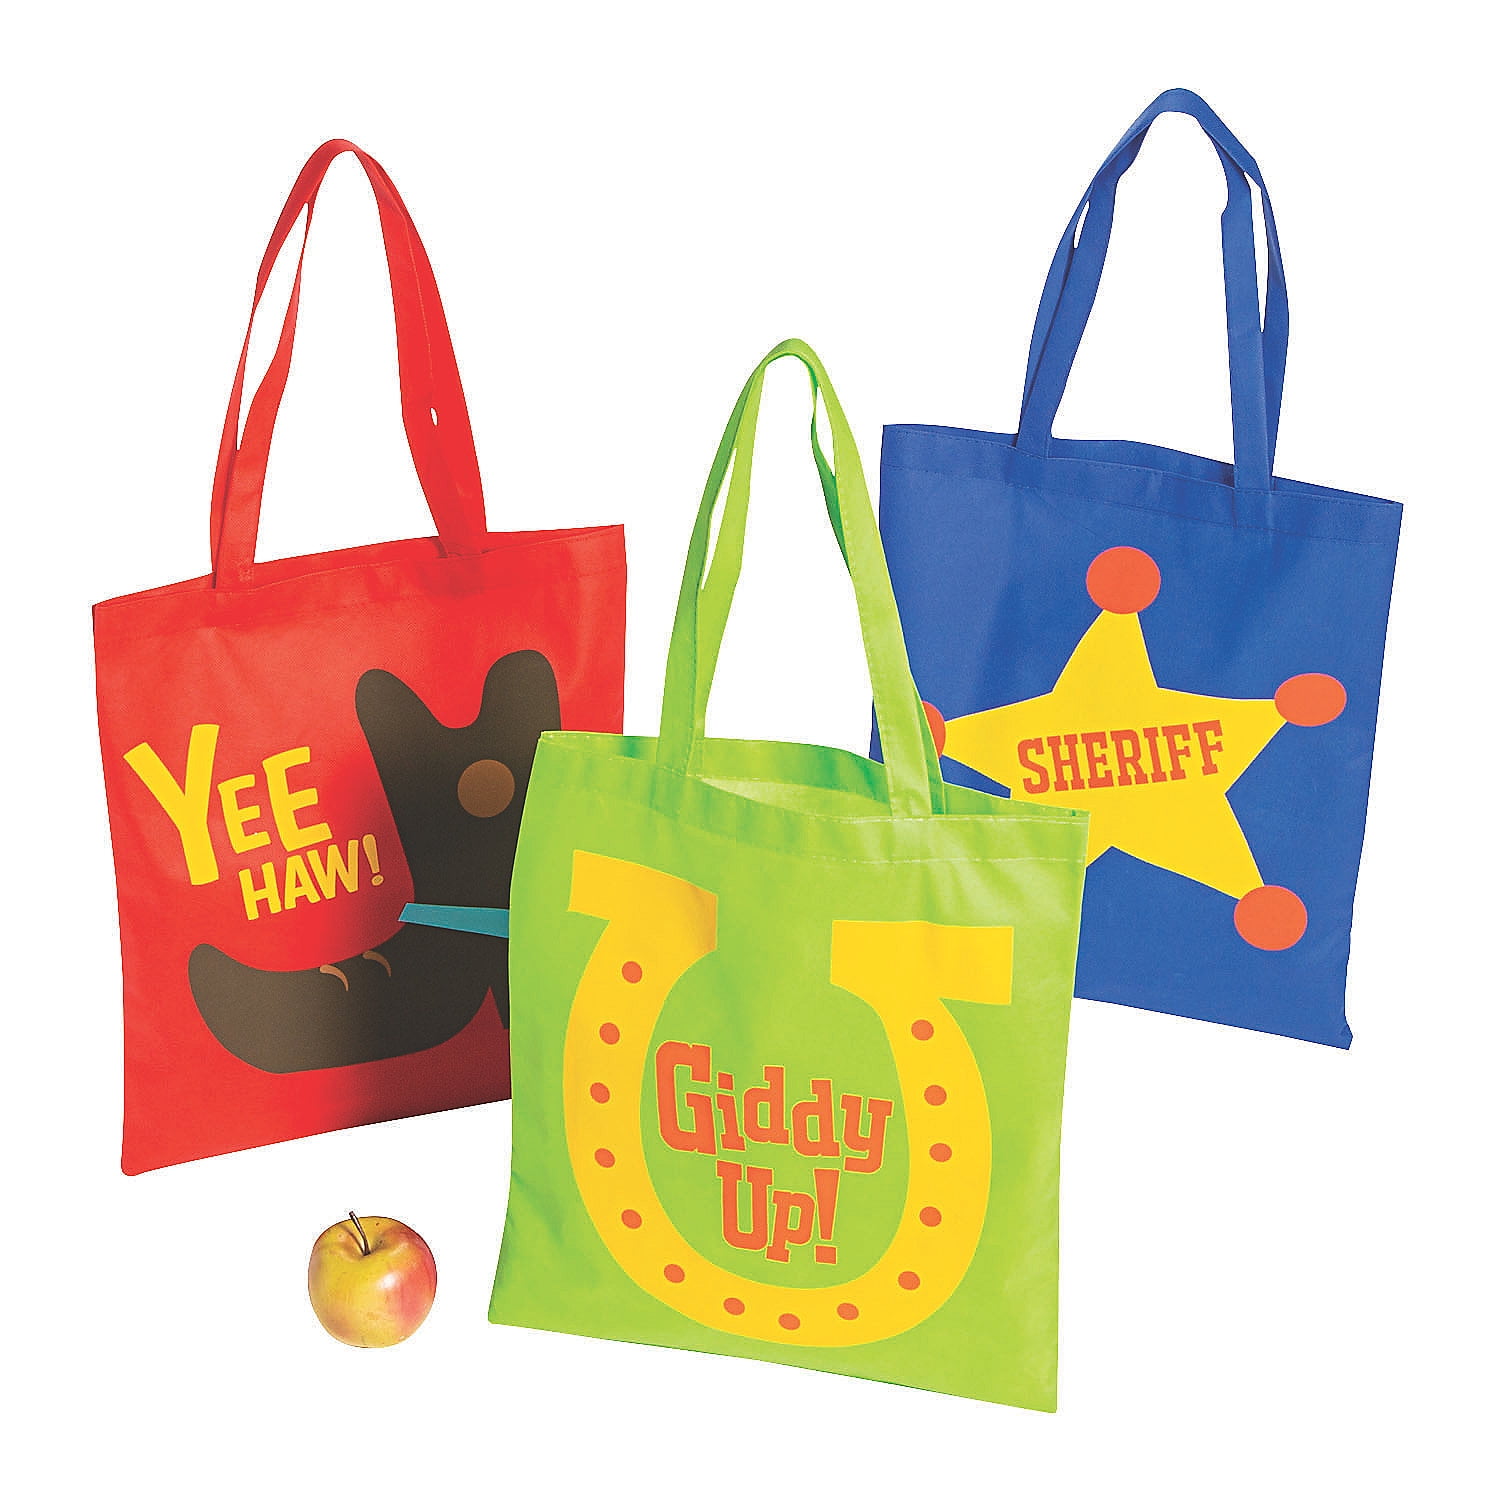 5 Re-usable Bags For Birthdays & Other Occasions Festive Party Gift Bag Set 